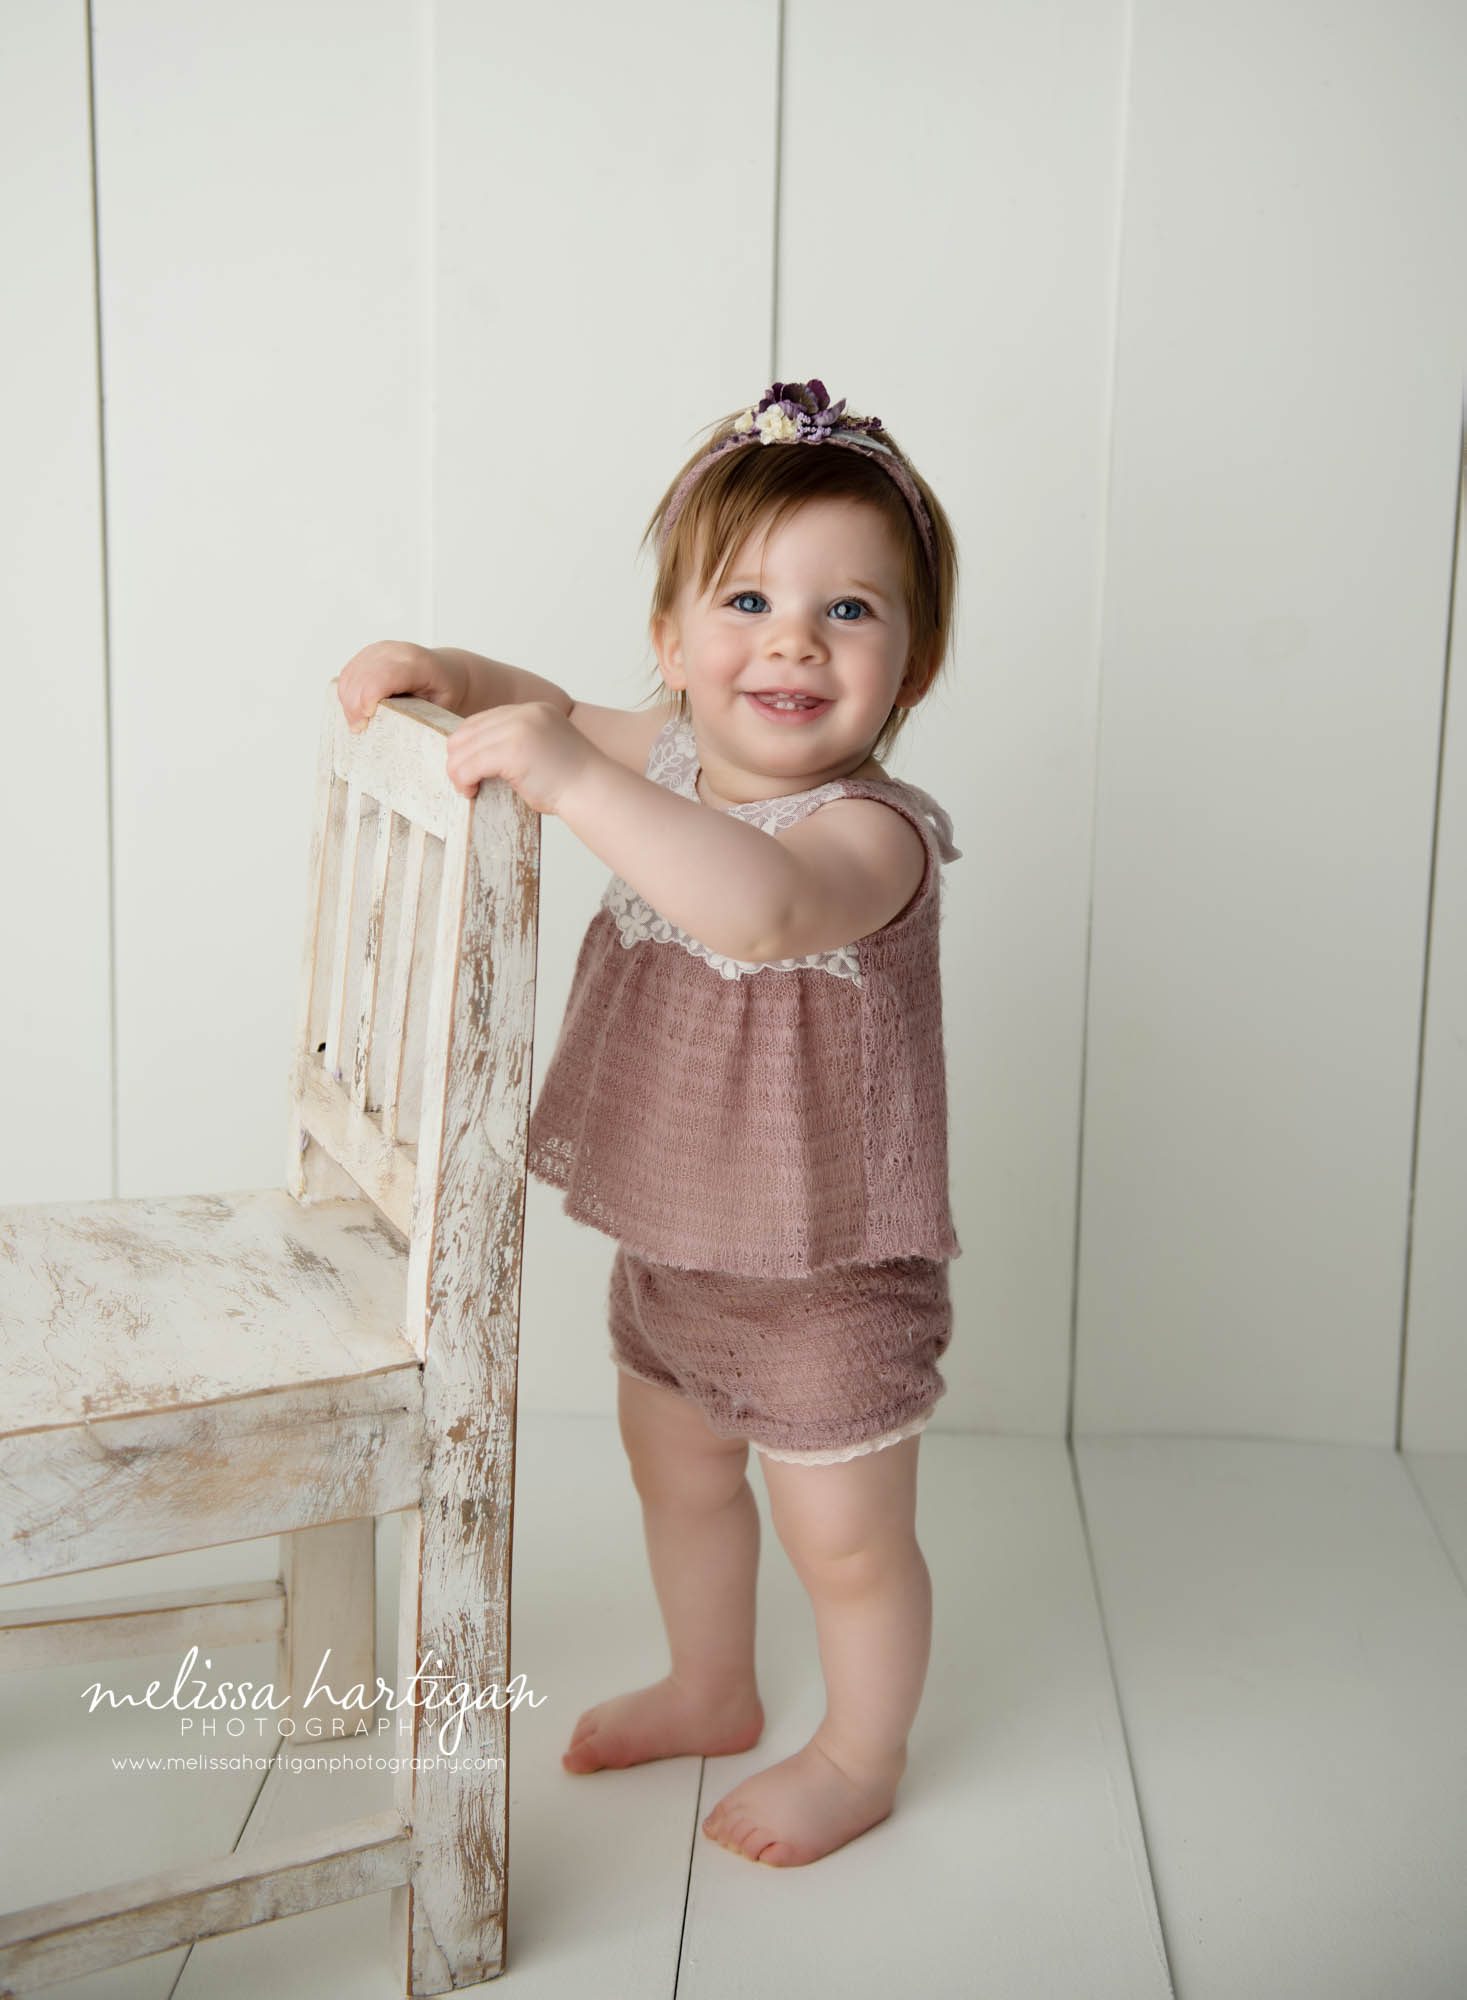 baby girl standing up smiling holding onto wooden chair in CT baby photography studio